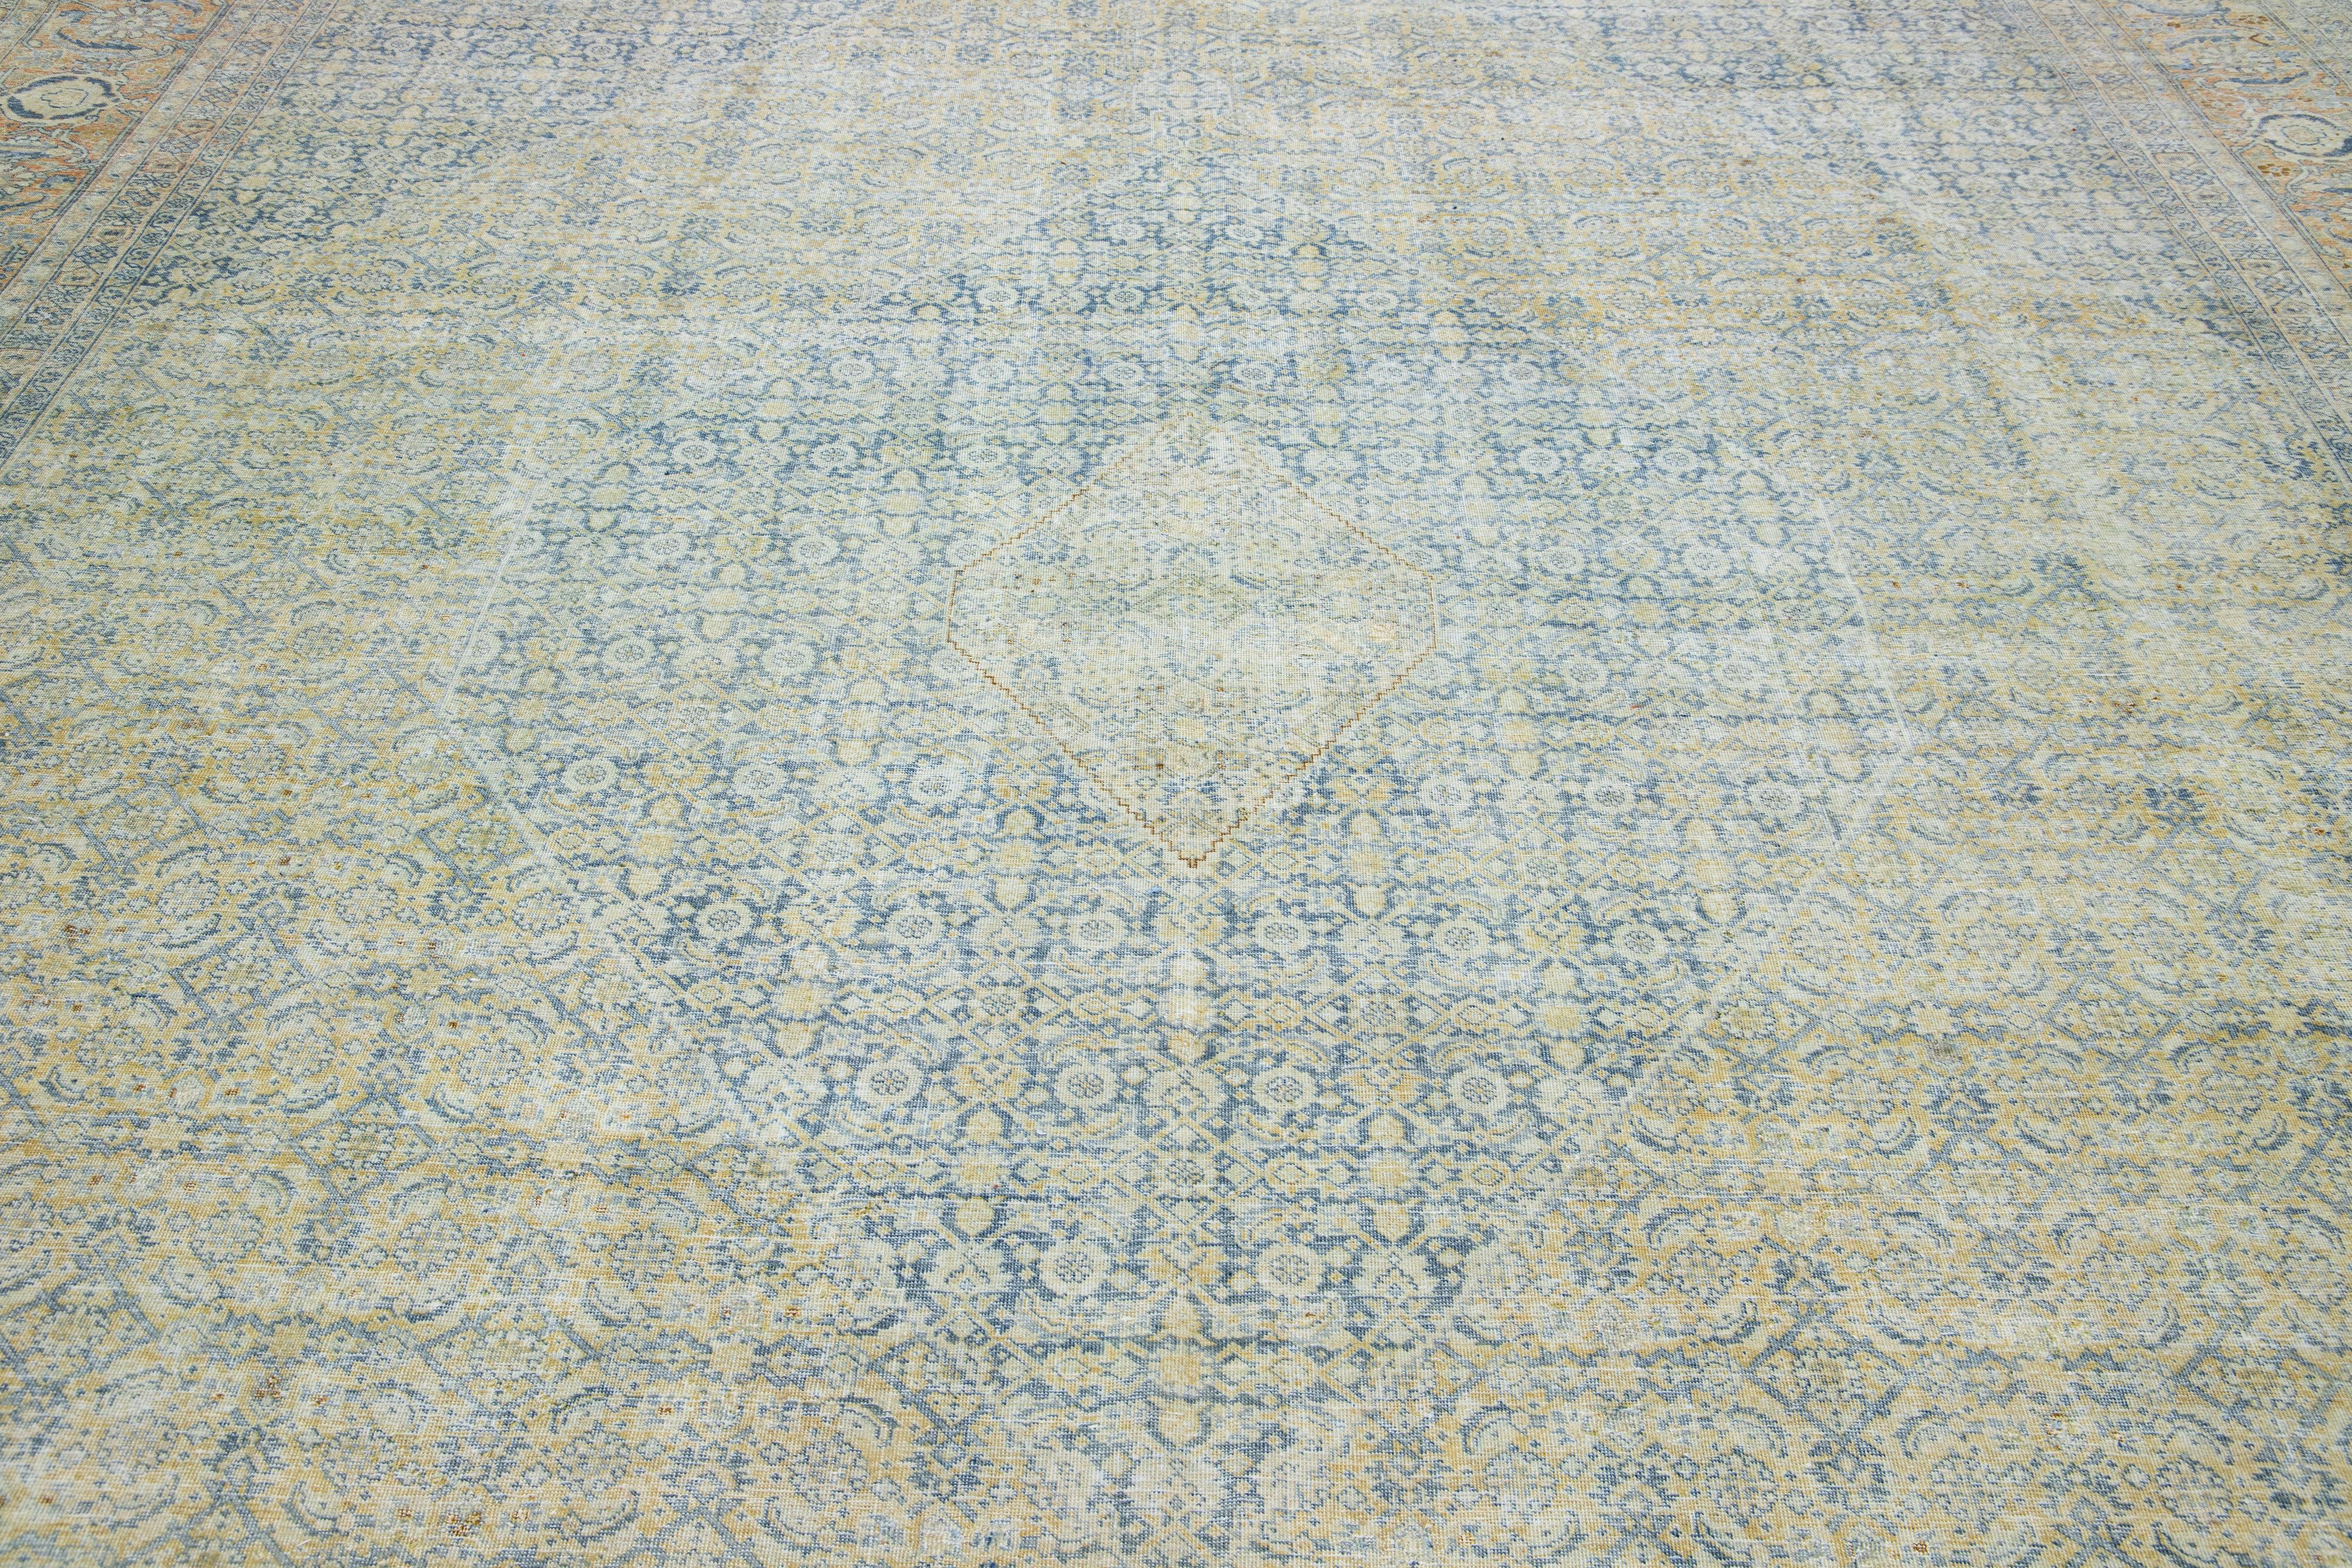 Oversize Antique Blue Persian Tabriz Wool Rug With Allover Floral Motif For Sale 2